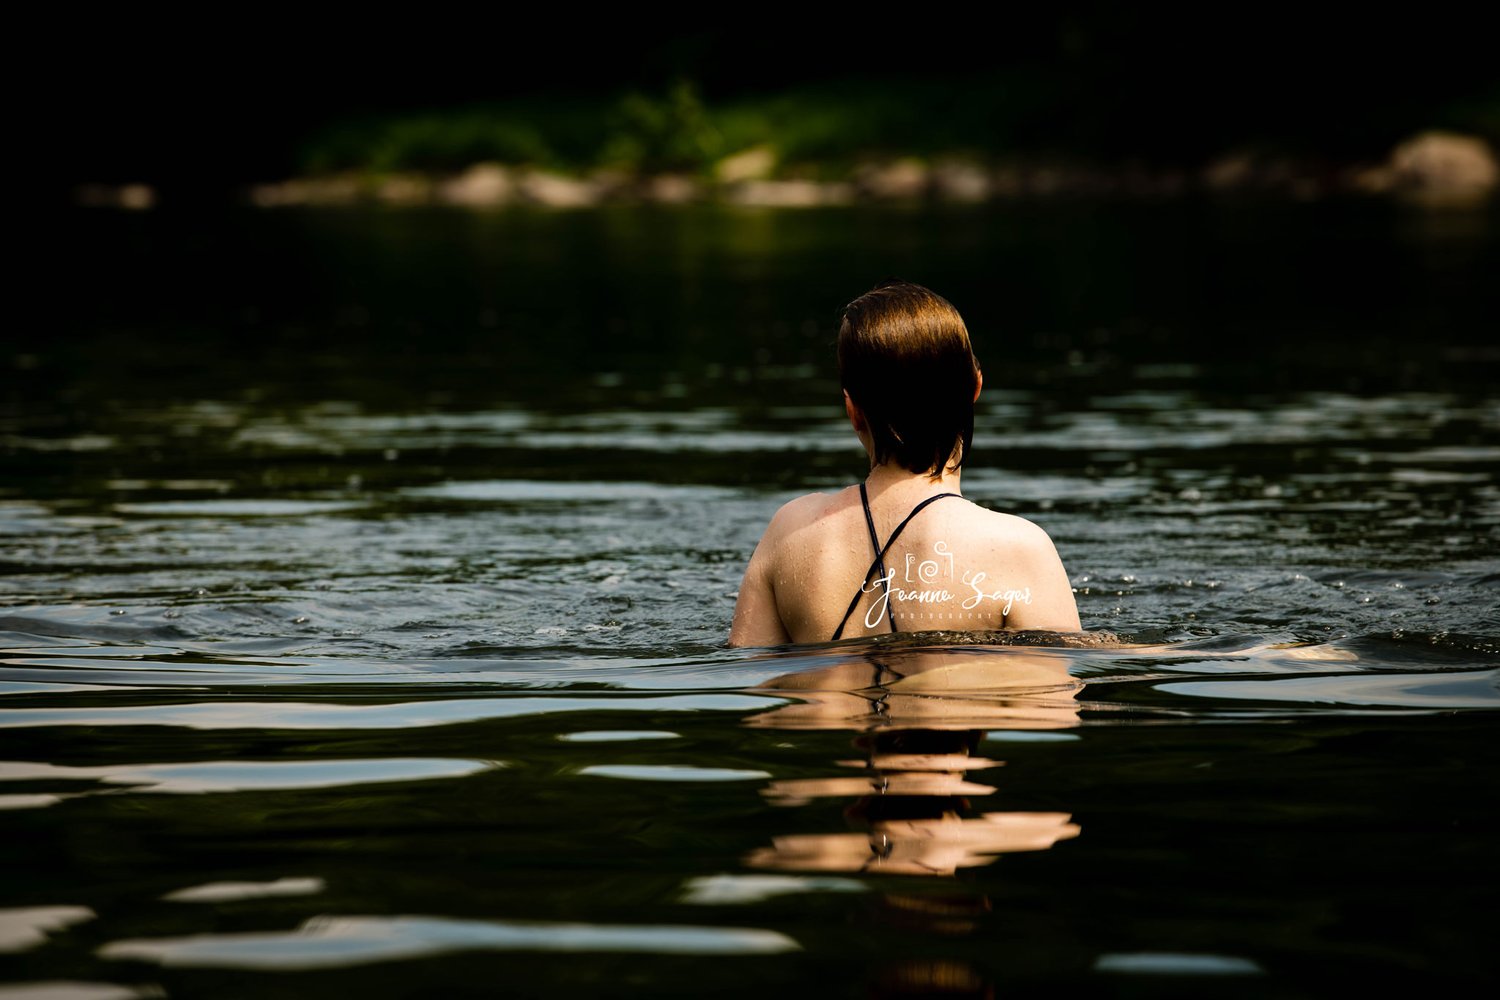 a girl swims in the Delaware River. Half of her body is above water, and the photo shows her from the back